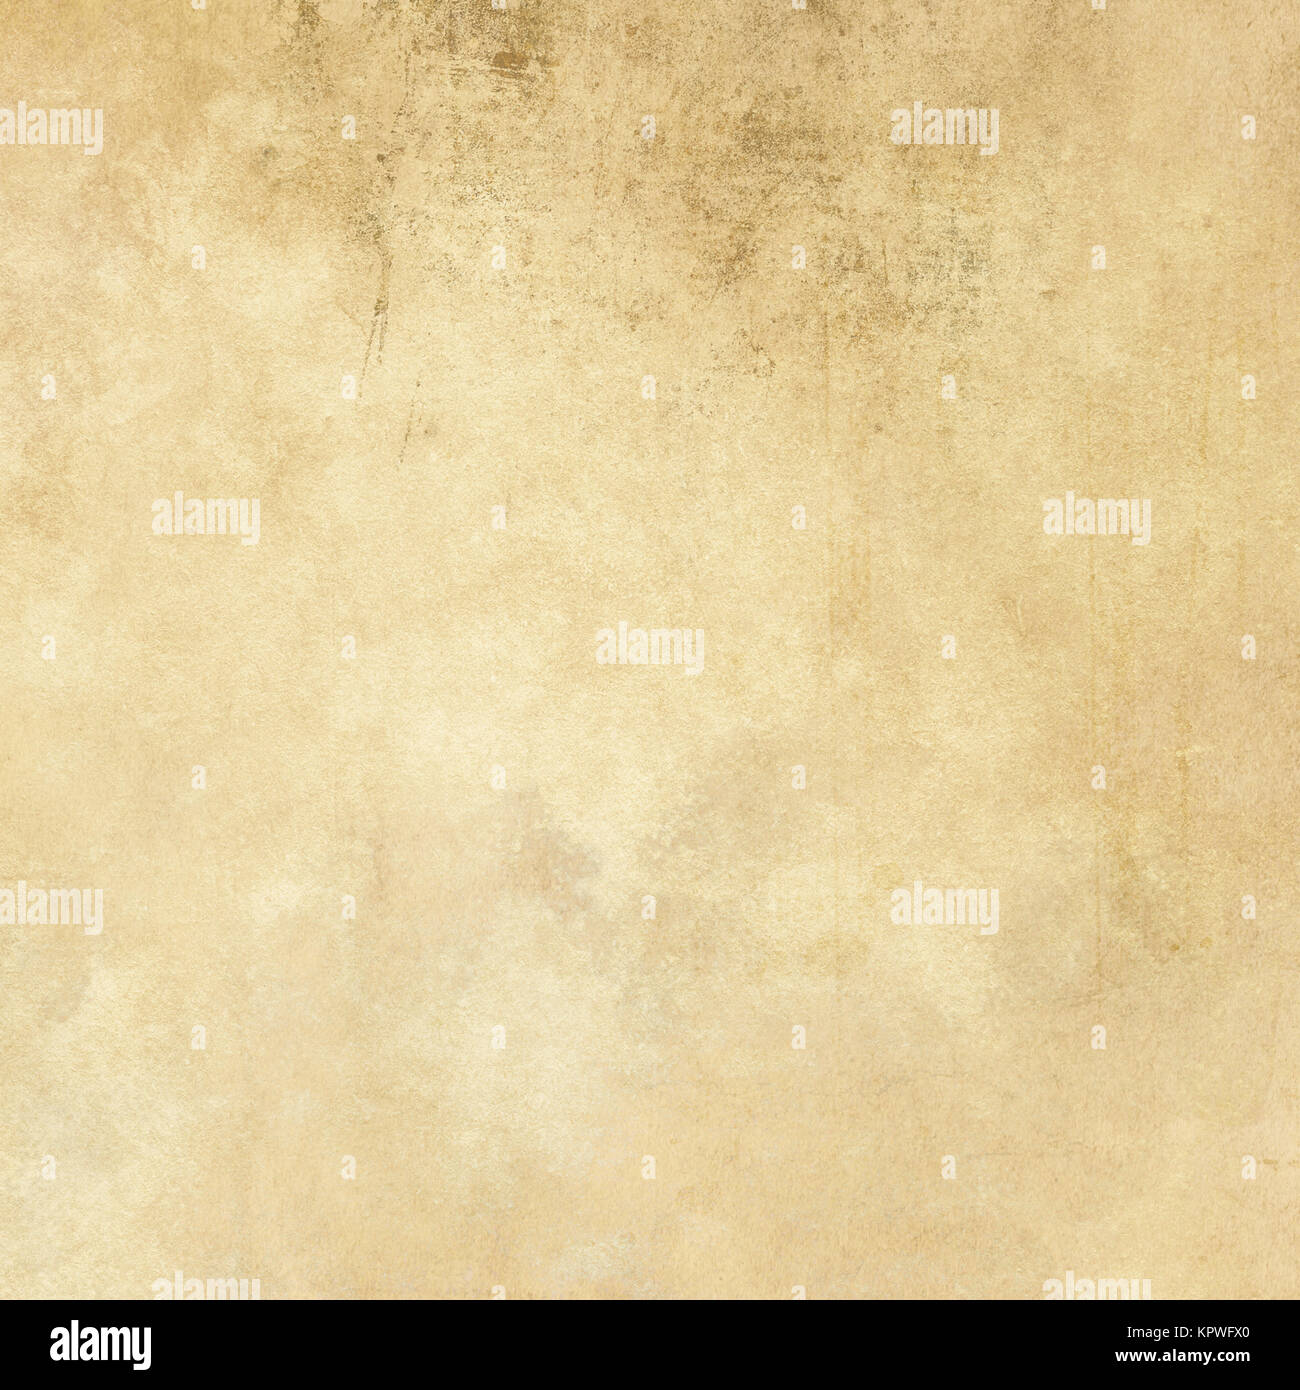 Grunge style paper background with stains and splats. Stock Photo